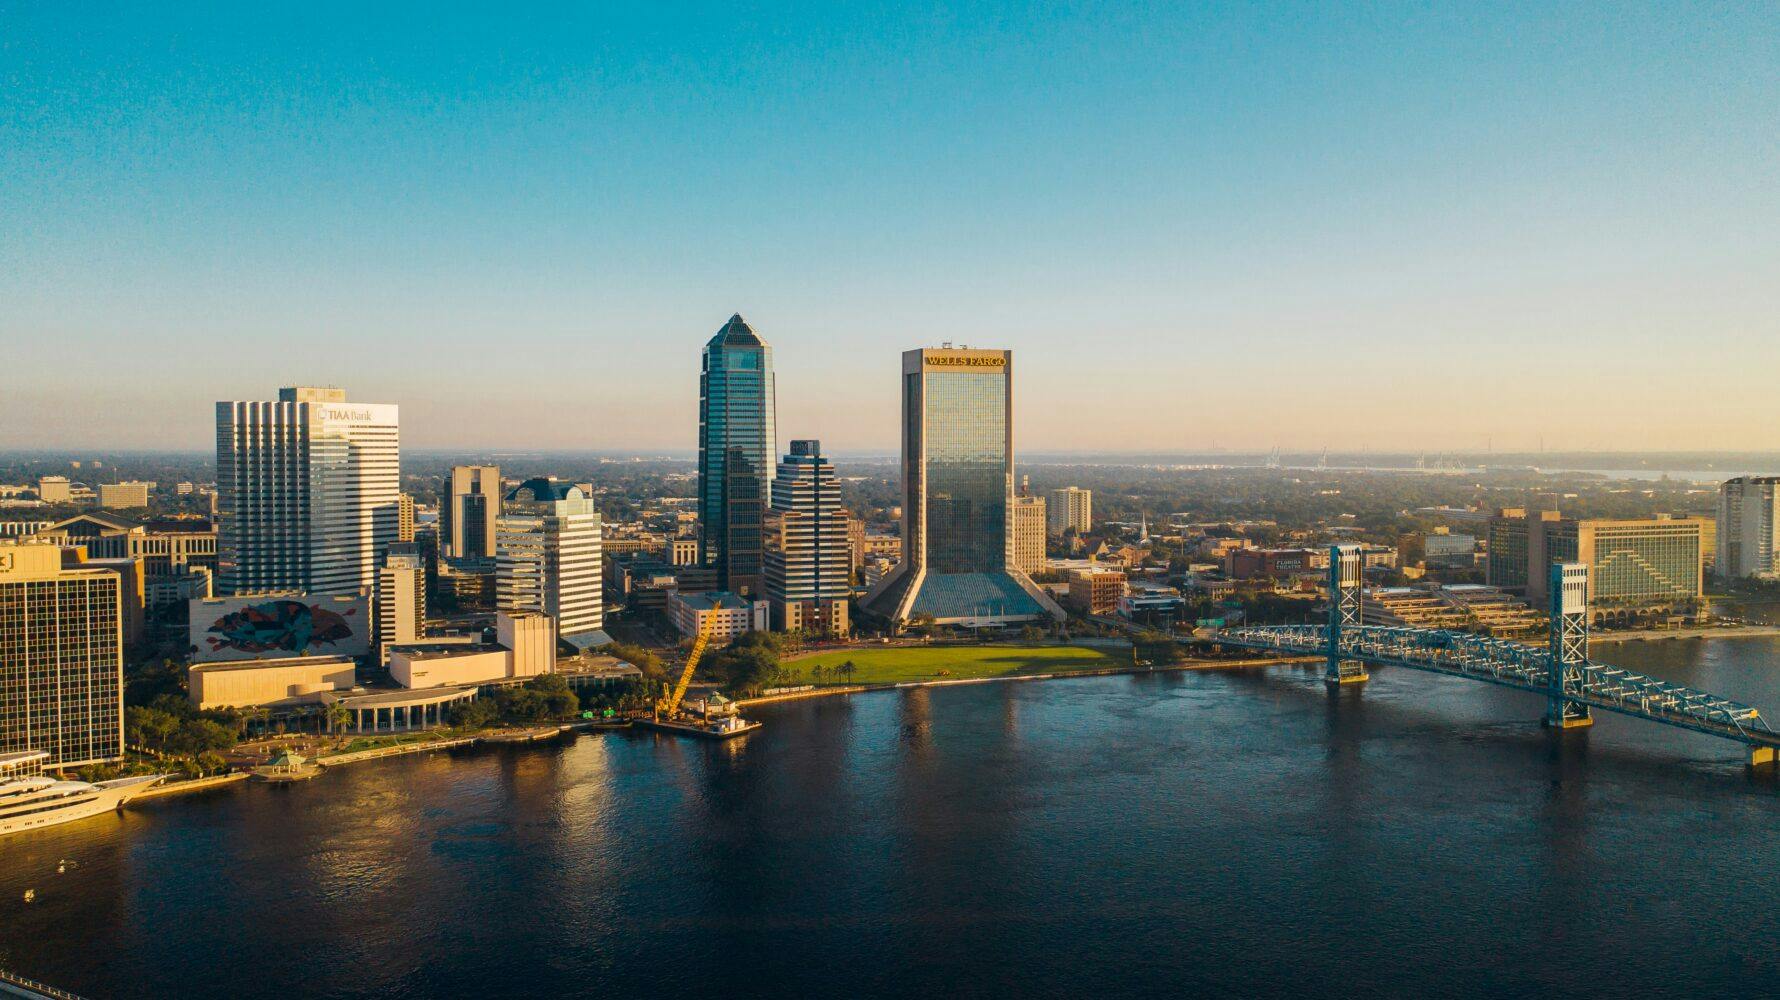 The 10 Best FREE Things to do in Jacksonville